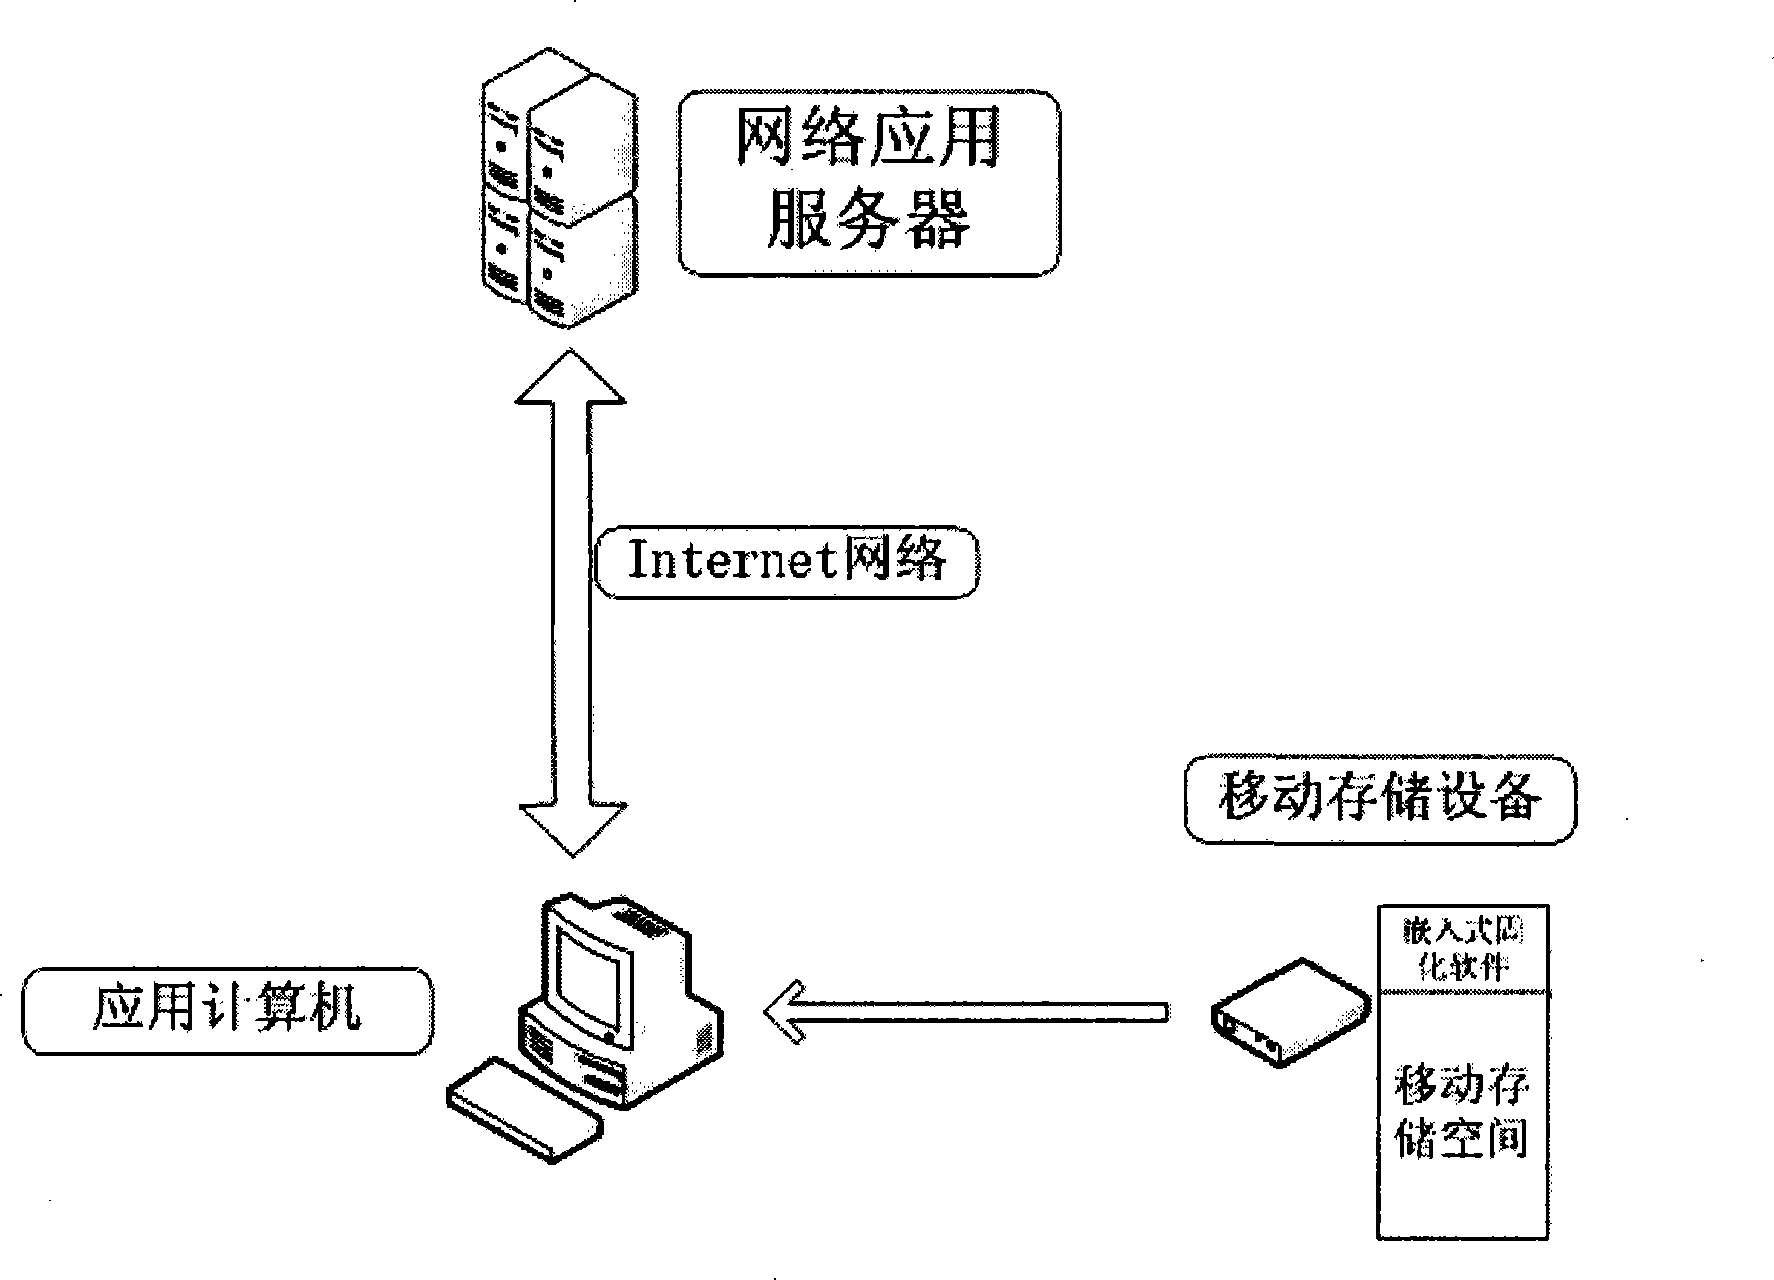 Method for combining mobile memory apparatus with network verification